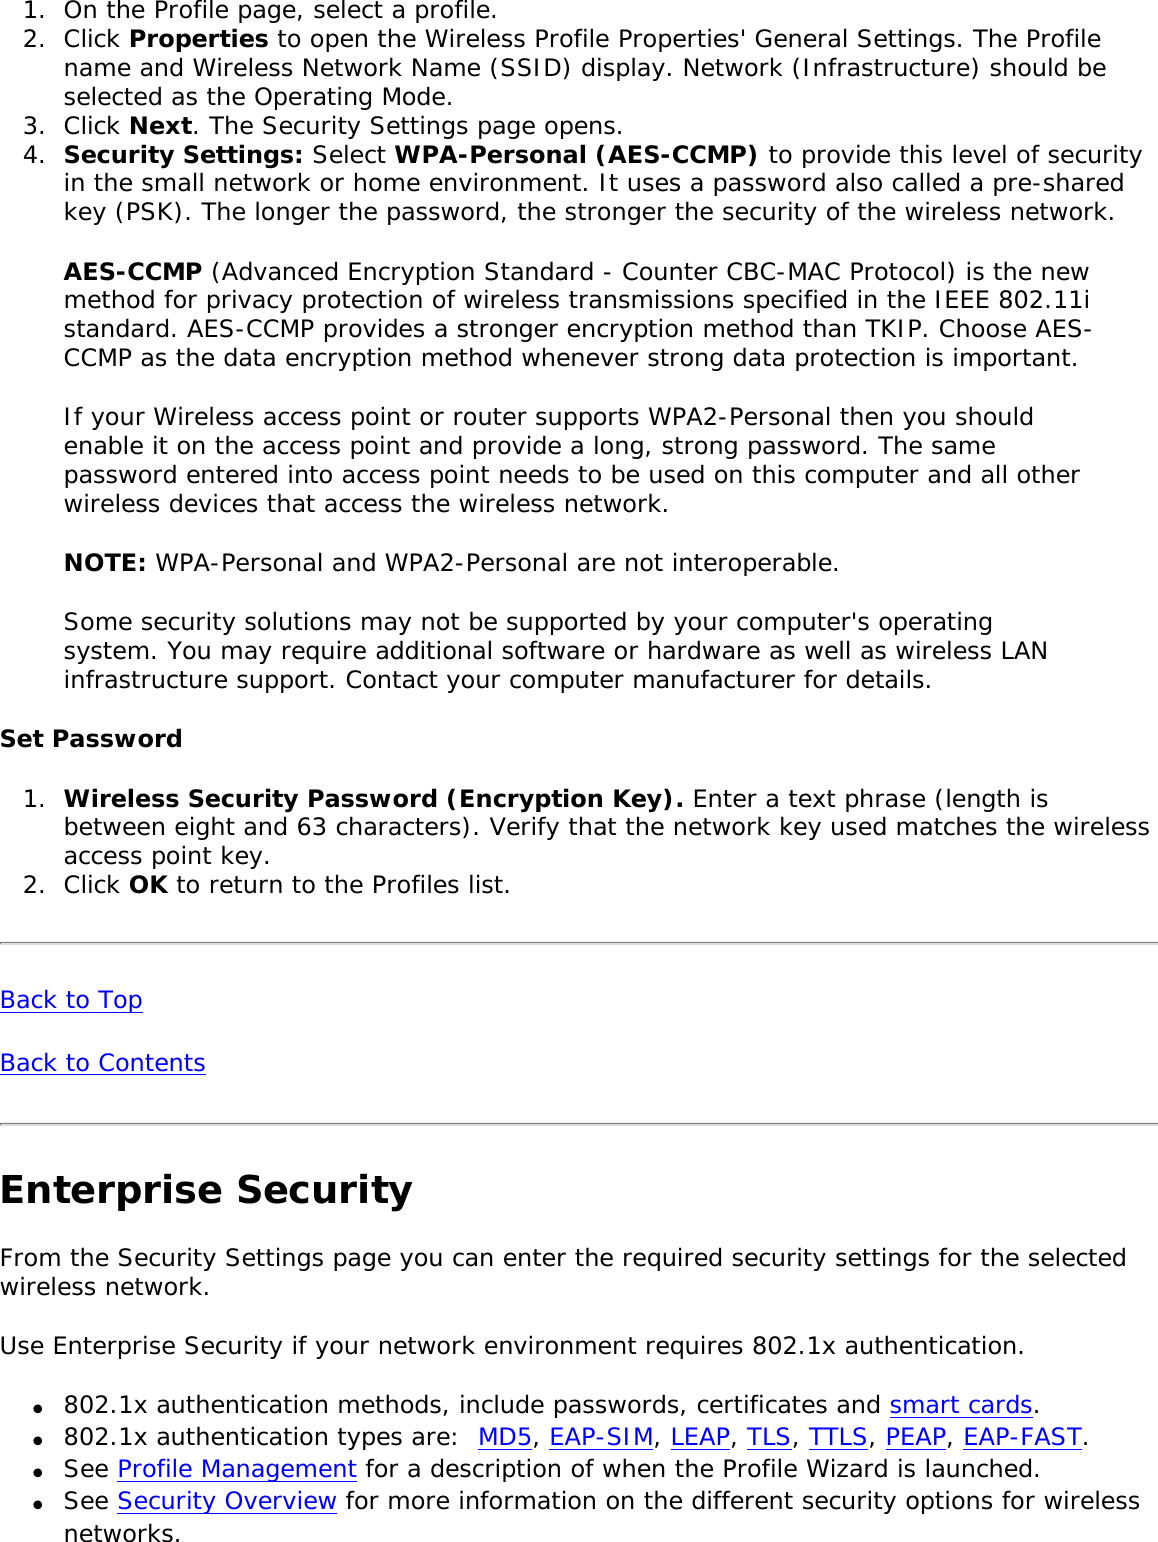 1.  On the Profile page, select a profile.2.  Click Properties to open the Wireless Profile Properties&apos; General Settings. The Profile name and Wireless Network Name (SSID) display. Network (Infrastructure) should be selected as the Operating Mode.3.  Click Next. The Security Settings page opens.4.  Security Settings: Select WPA-Personal (AES-CCMP) to provide this level of security in the small network or home environment. It uses a password also called a pre-shared key (PSK). The longer the password, the stronger the security of the wireless network.AES-CCMP (Advanced Encryption Standard - Counter CBC-MAC Protocol) is the new method for privacy protection of wireless transmissions specified in the IEEE 802.11i standard. AES-CCMP provides a stronger encryption method than TKIP. Choose AES-CCMP as the data encryption method whenever strong data protection is important. If your Wireless access point or router supports WPA2-Personal then you should enable it on the access point and provide a long, strong password. The same password entered into access point needs to be used on this computer and all other wireless devices that access the wireless network. NOTE: WPA-Personal and WPA2-Personal are not interoperable. Some security solutions may not be supported by your computer&apos;s operating system. You may require additional software or hardware as well as wireless LAN infrastructure support. Contact your computer manufacturer for details. Set Password 1.  Wireless Security Password (Encryption Key). Enter a text phrase (length is between eight and 63 characters). Verify that the network key used matches the wireless access point key.2.  Click OK to return to the Profiles list.Back to TopBack to Contents Enterprise Security From the Security Settings page you can enter the required security settings for the selected wireless network. Use Enterprise Security if your network environment requires 802.1x authentication. ●     802.1x authentication methods, include passwords, certificates and smart cards. ●     802.1x authentication types are:  MD5, EAP-SIM, LEAP, TLS, TTLS, PEAP, EAP-FAST. ●     See Profile Management for a description of when the Profile Wizard is launched. ●     See Security Overview for more information on the different security options for wireless networks. 